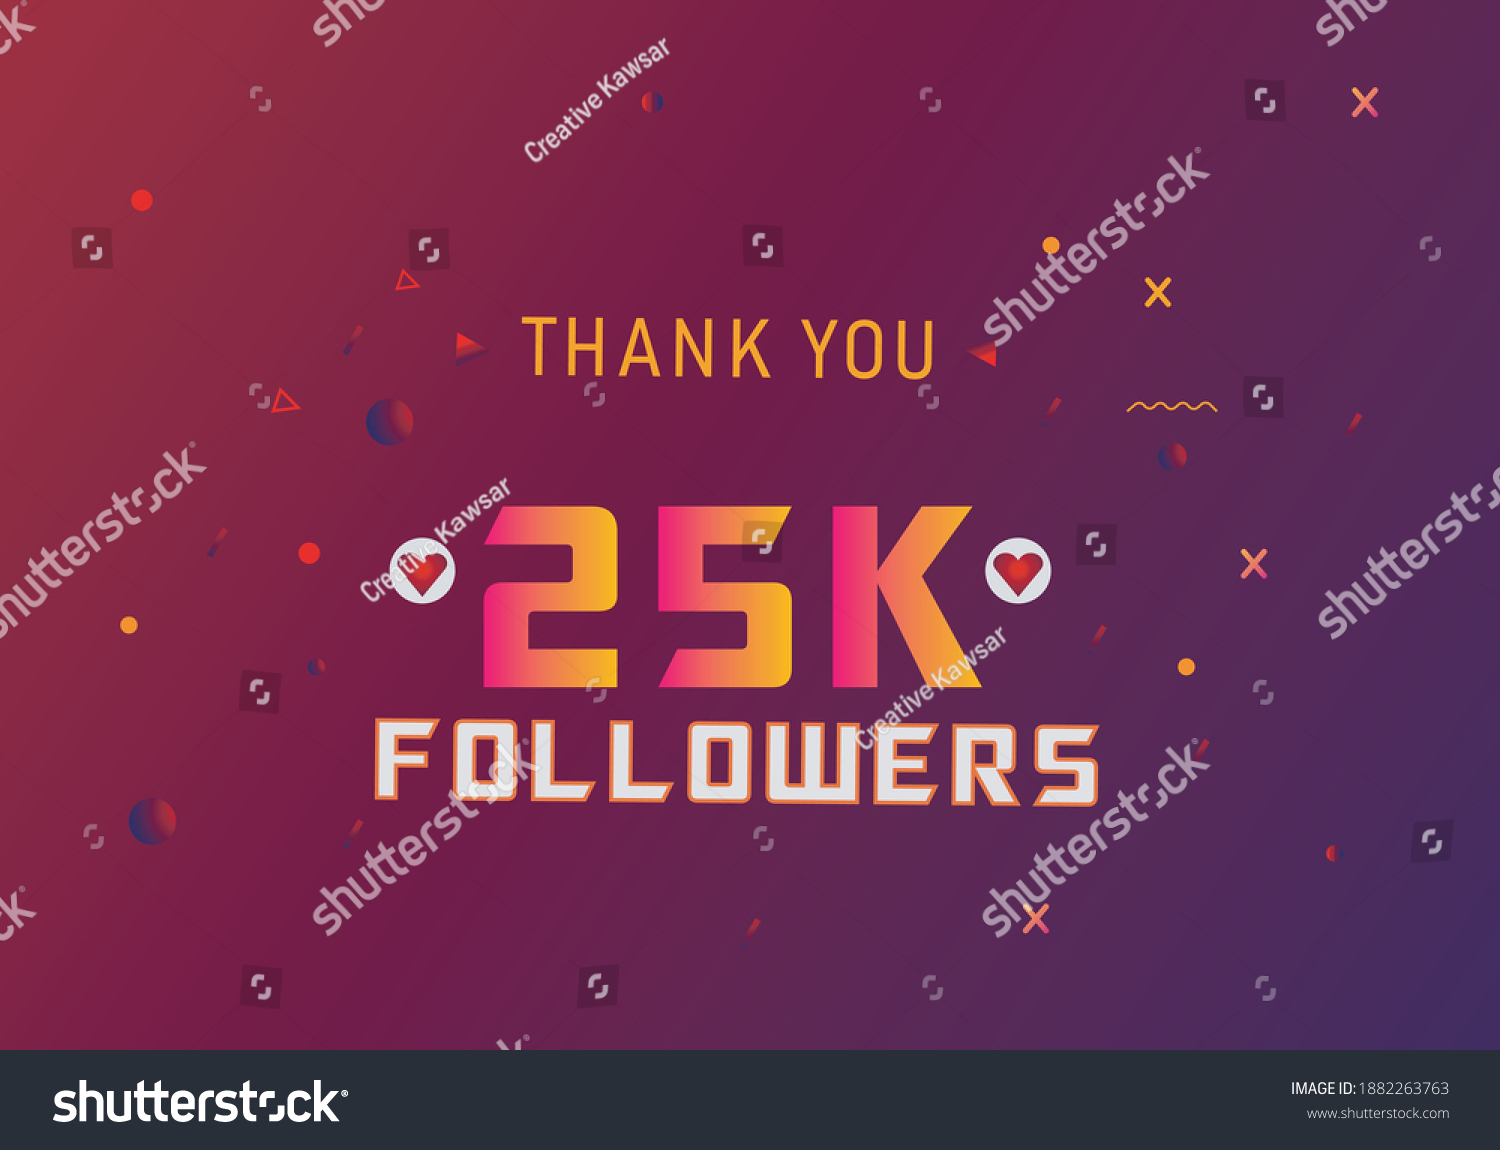 SVG of 25k followers thank you. thank you 25k followers template. celebration 25k subscribers template for social media. 25000 followers thank you svg